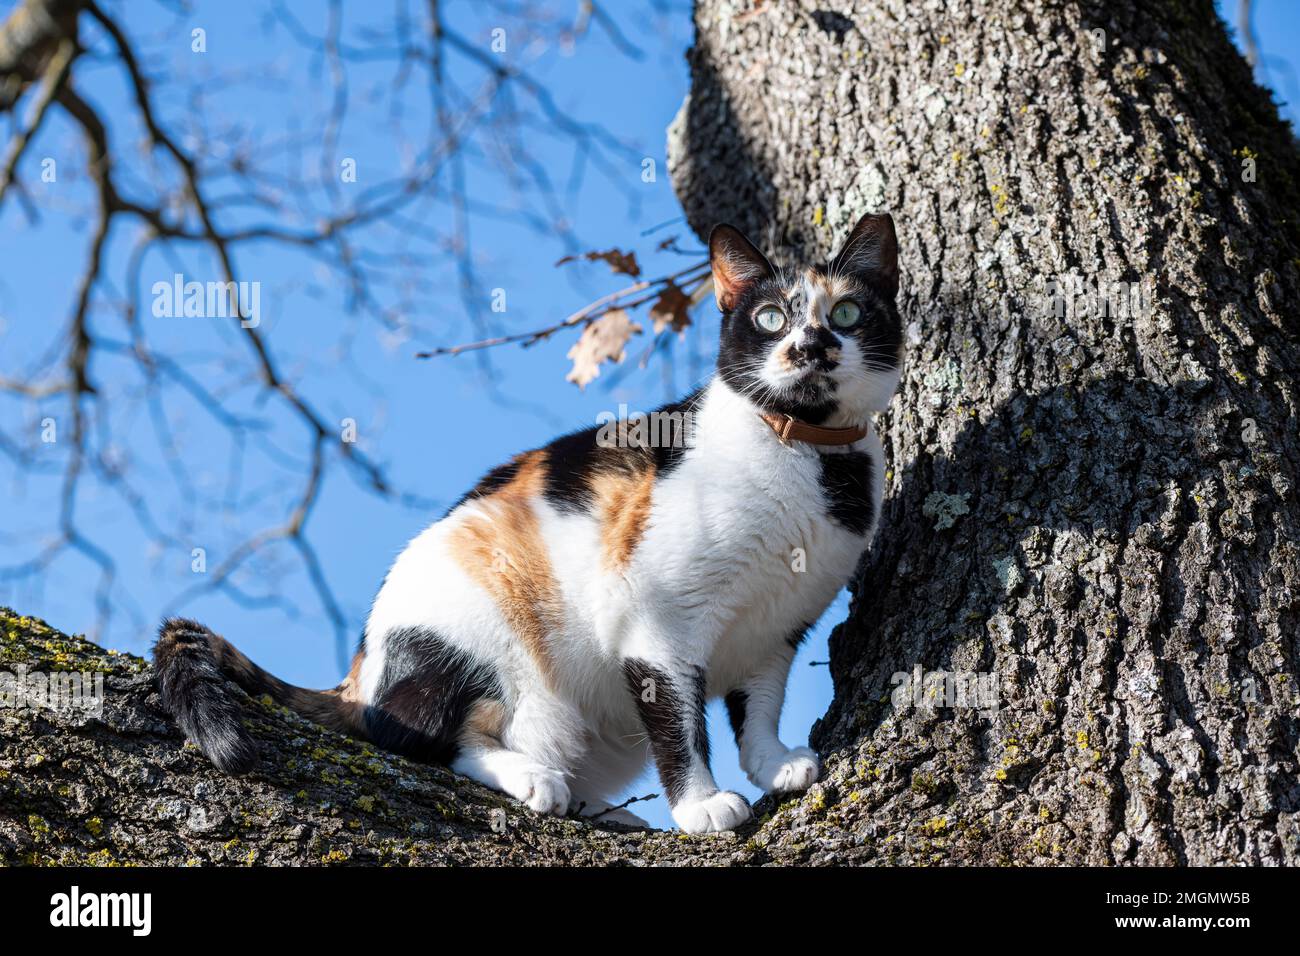 A vibrant multicolored cat perched on a bare oak tree in the winter landscape. The cat's fur is a mix of colours, orange, white, black with green eyes Stock Photo